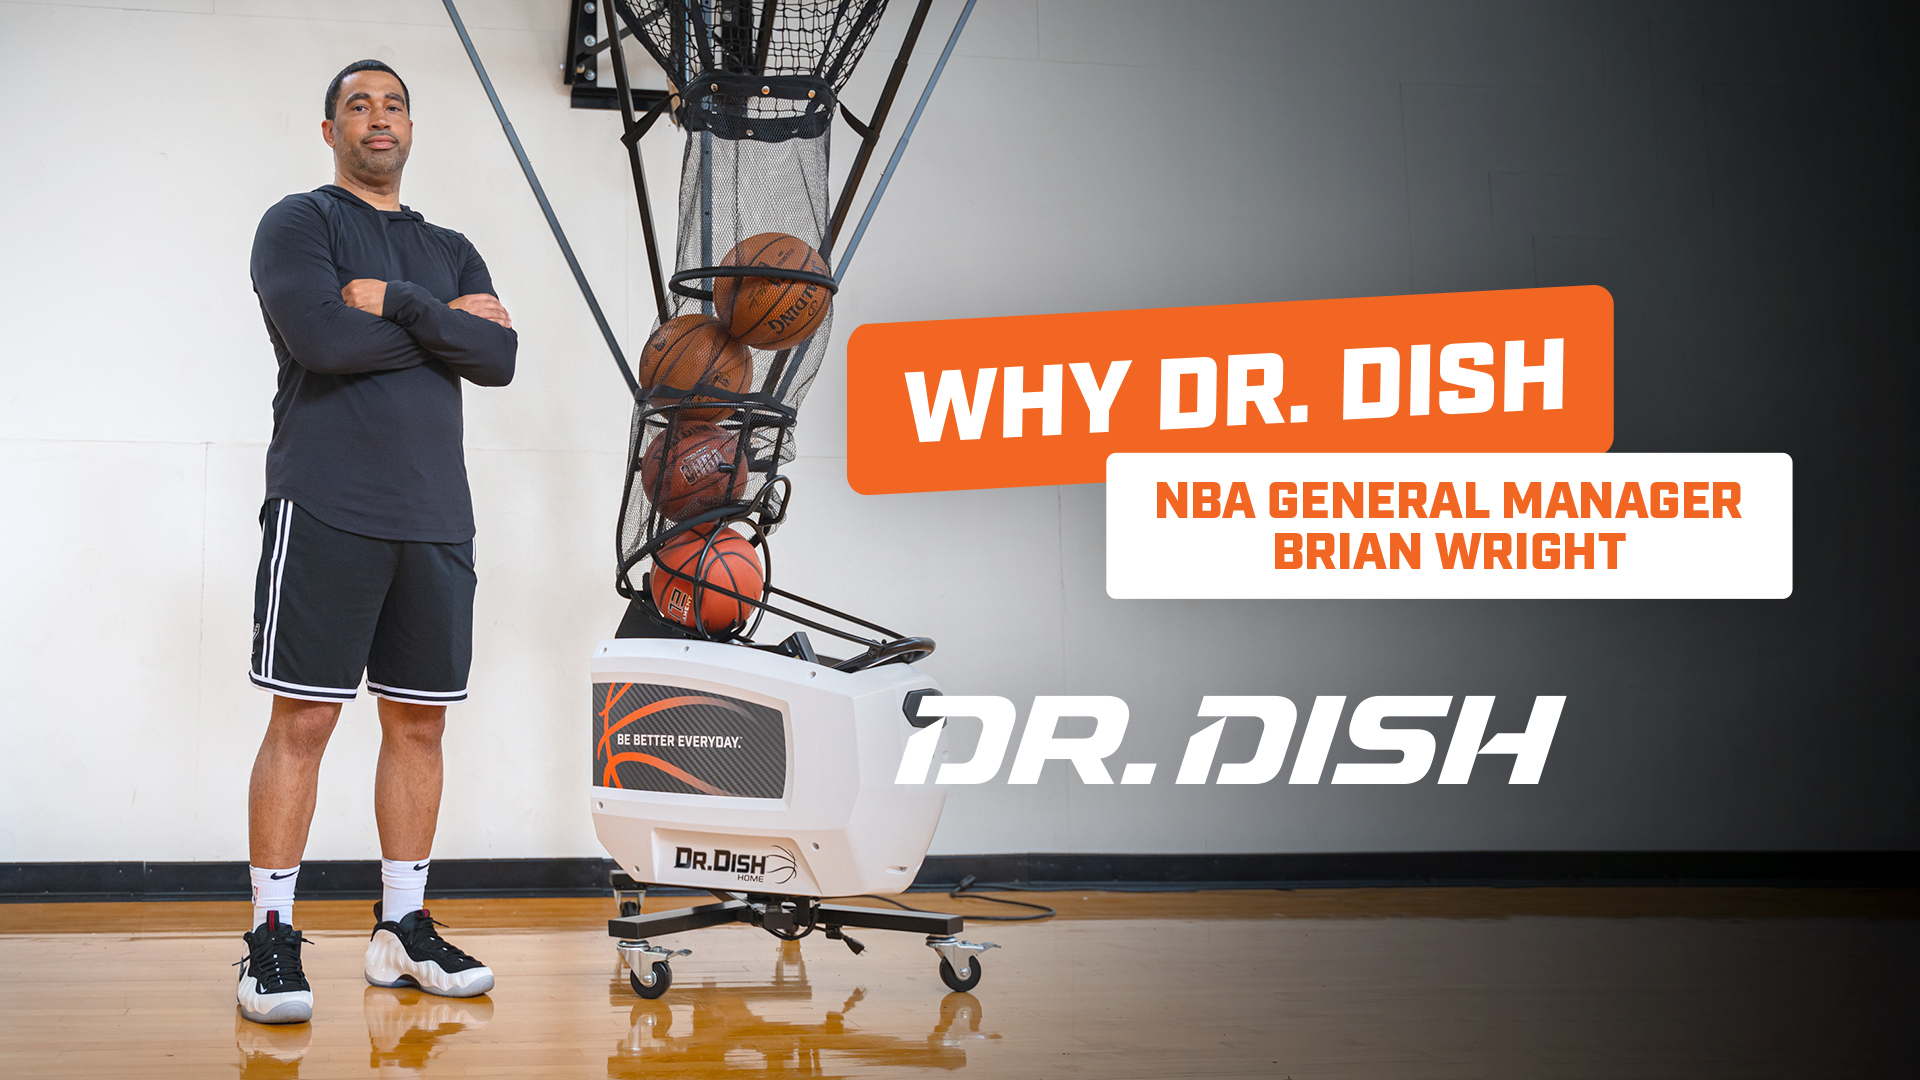 Spurs General Manager Brian Wright Shares Why he Trains with Dr. Dish